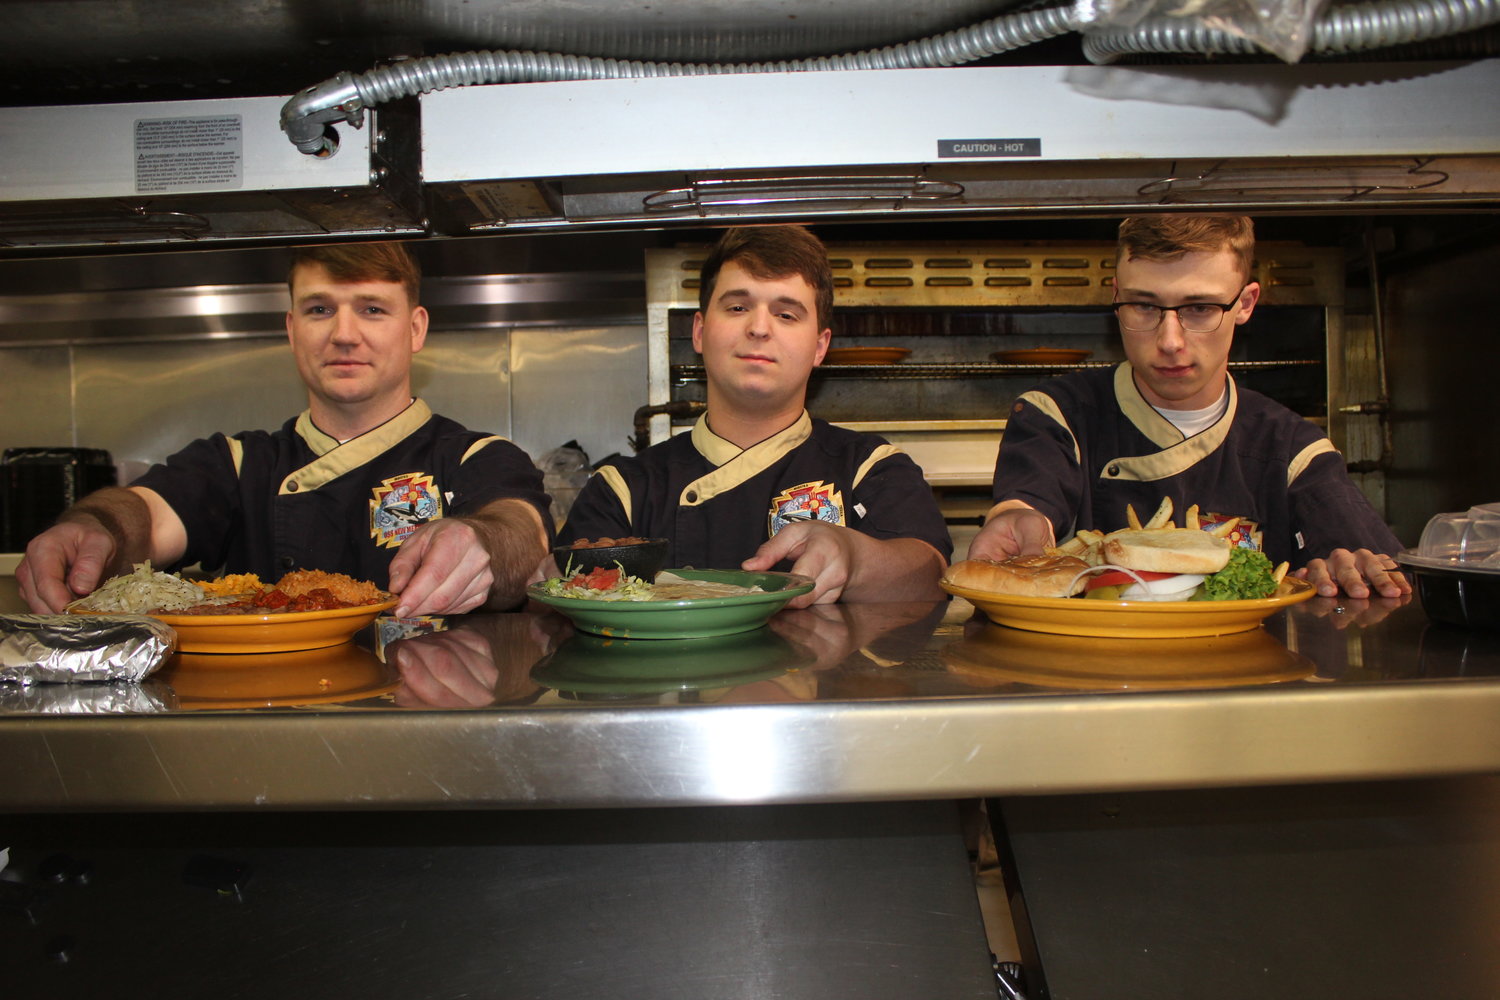 Kyle Scott, Cole Pagels and Nick Armantrout Buckler, culinary specialists from the Navy Submarine USS New Mexico, recently trained in the kitchen of La Posta de Mesilla, the namesake of their sub’s galley.